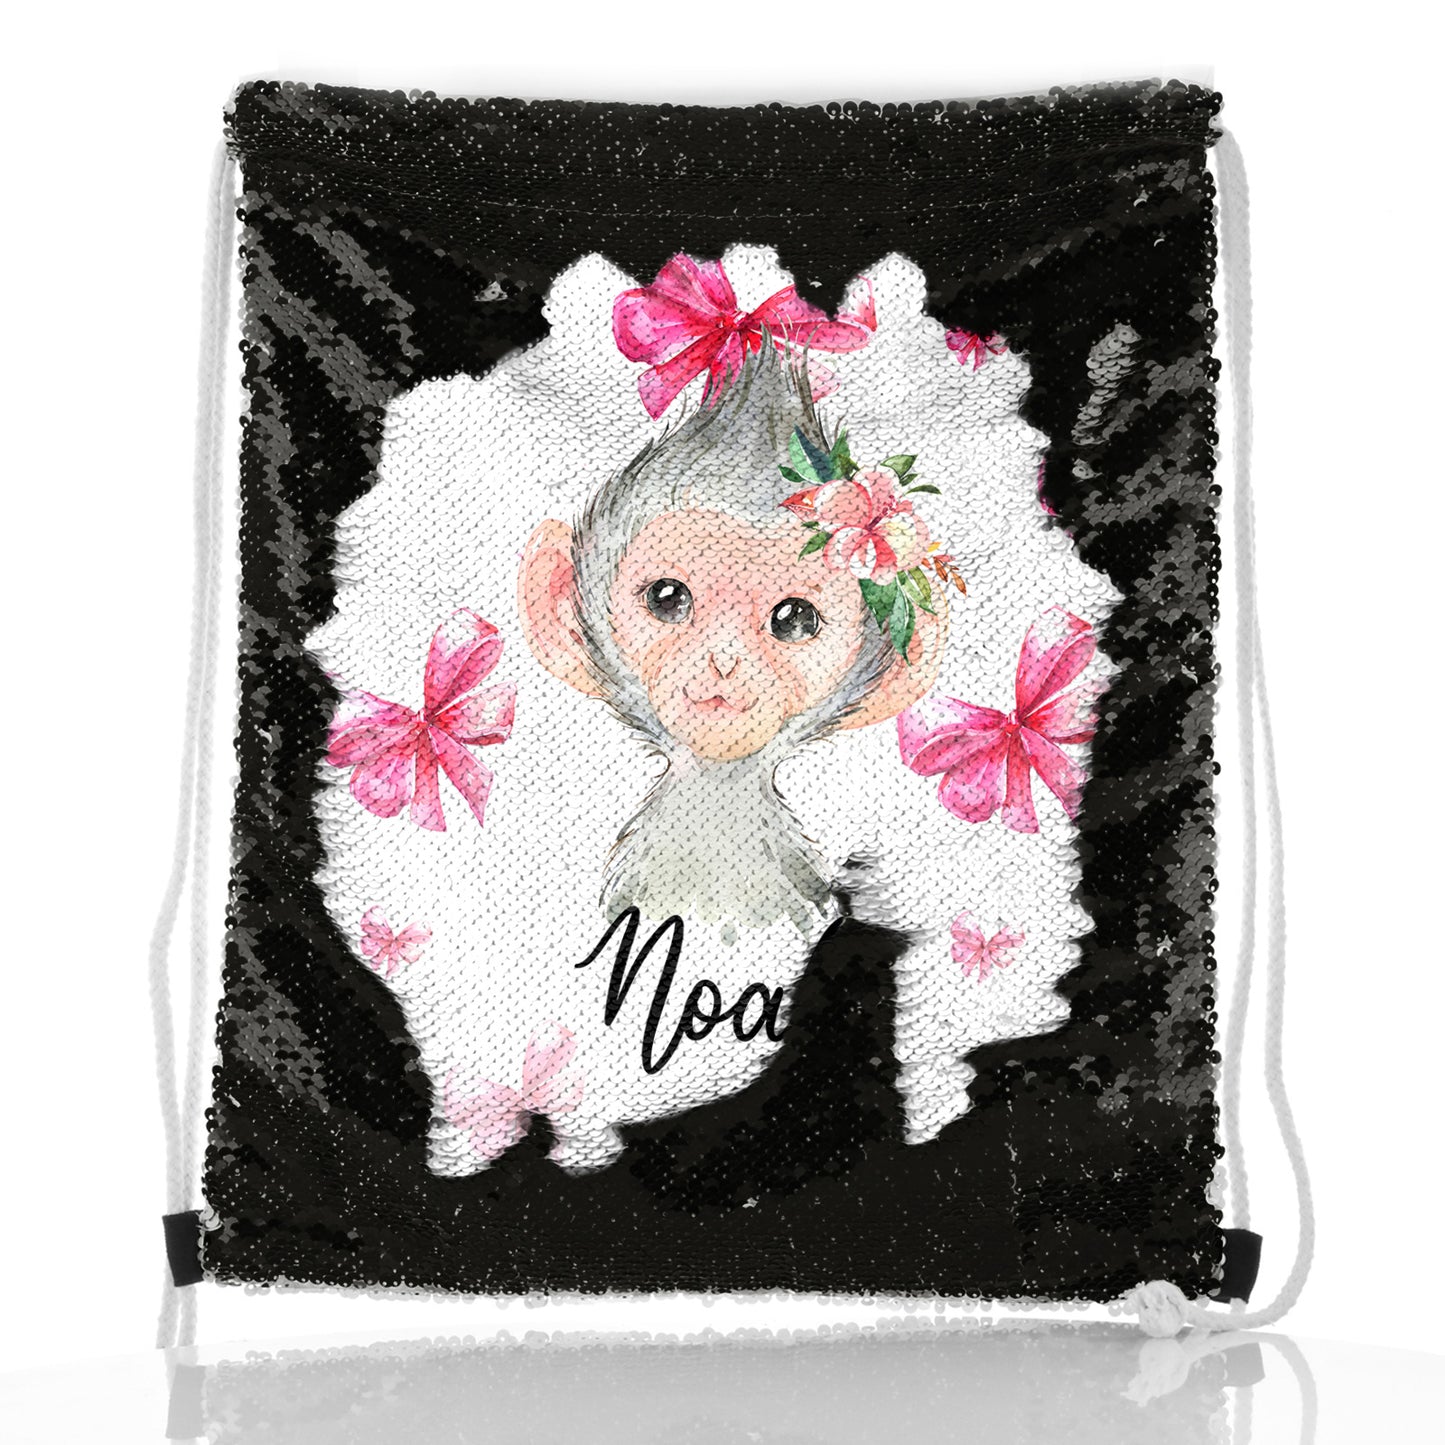 Personalised Sequin Drawstring Backpack with Monkey Pink Bows and Cute Text